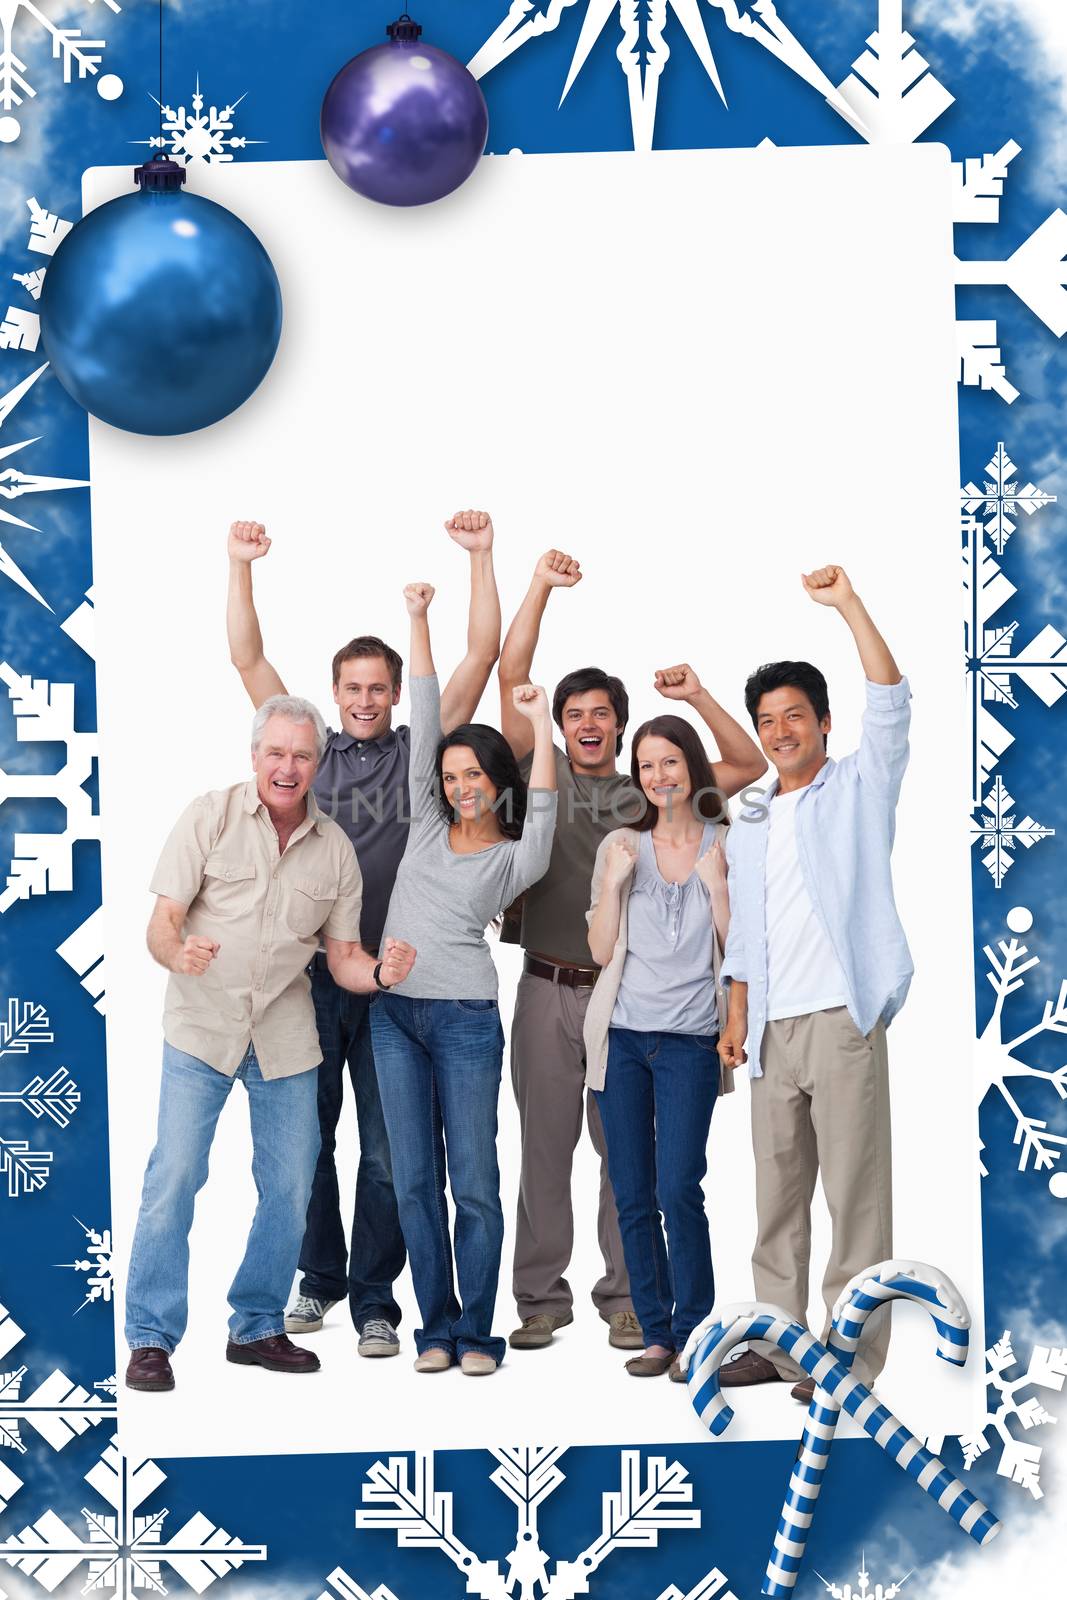 Cheering group of people against christmas frame